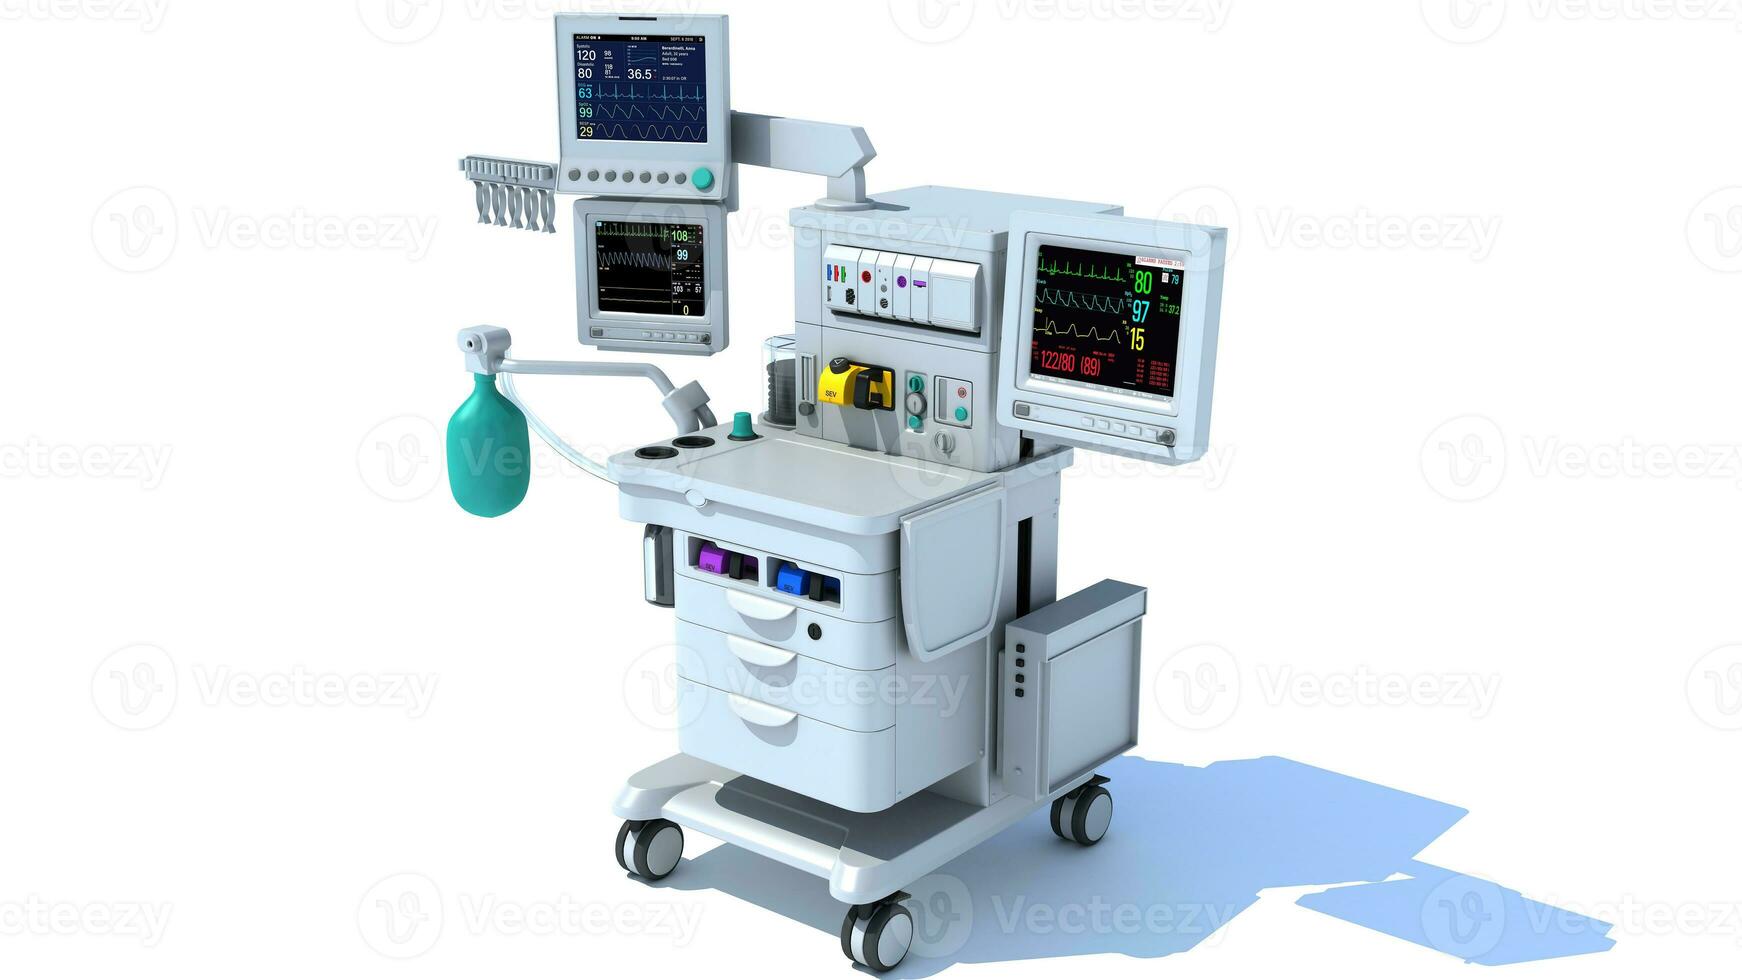 Anesthesia Respiratory Workstation Trolley medical equipment 3D rendering on white background photo